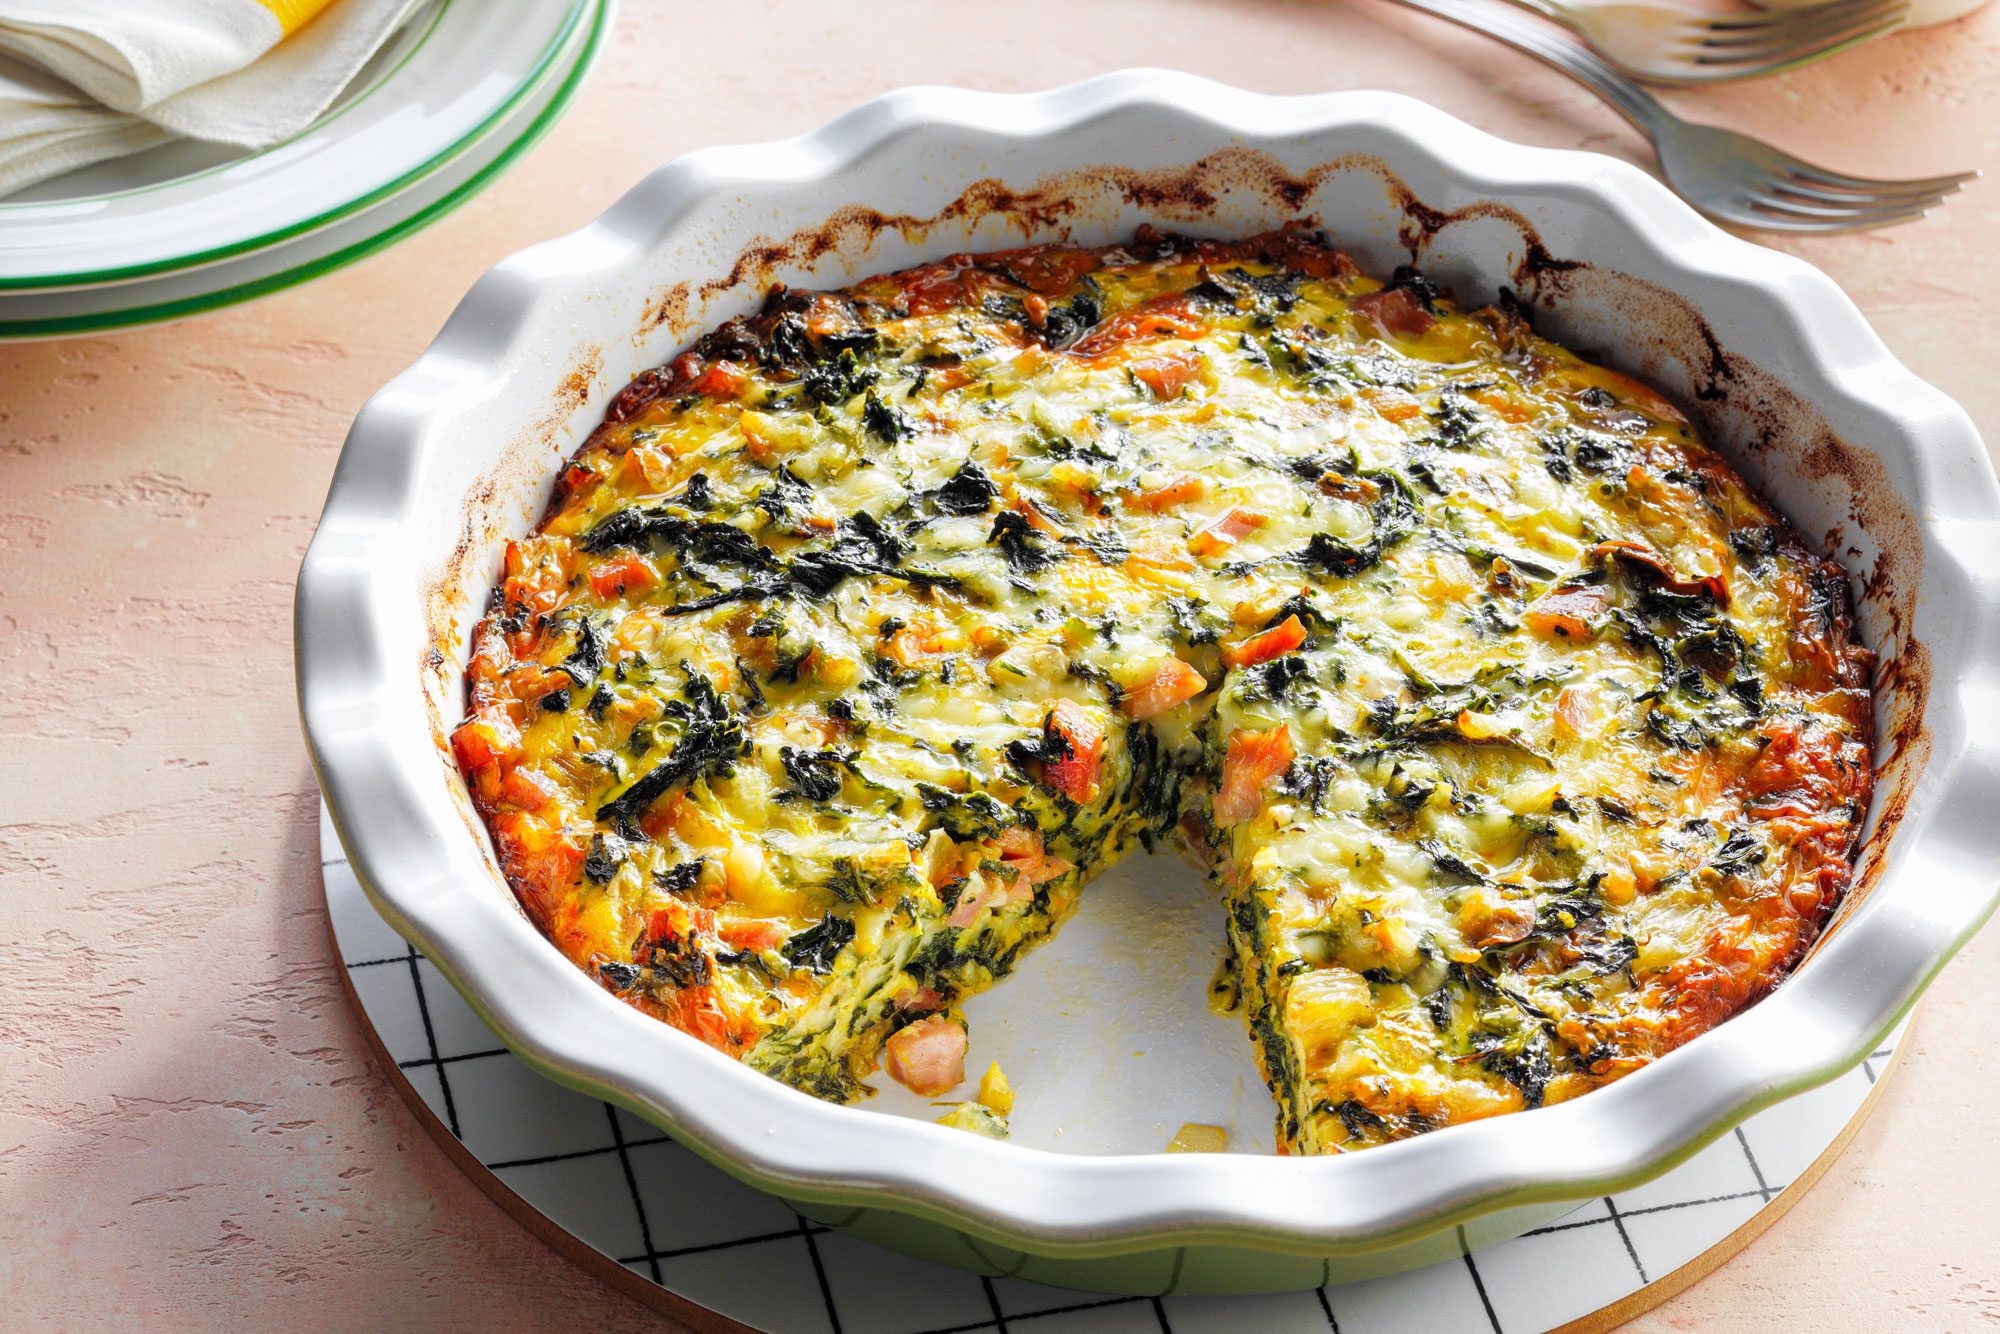 Crustless Spinach Quiche in a Pie Plate on a Light Salmon Background